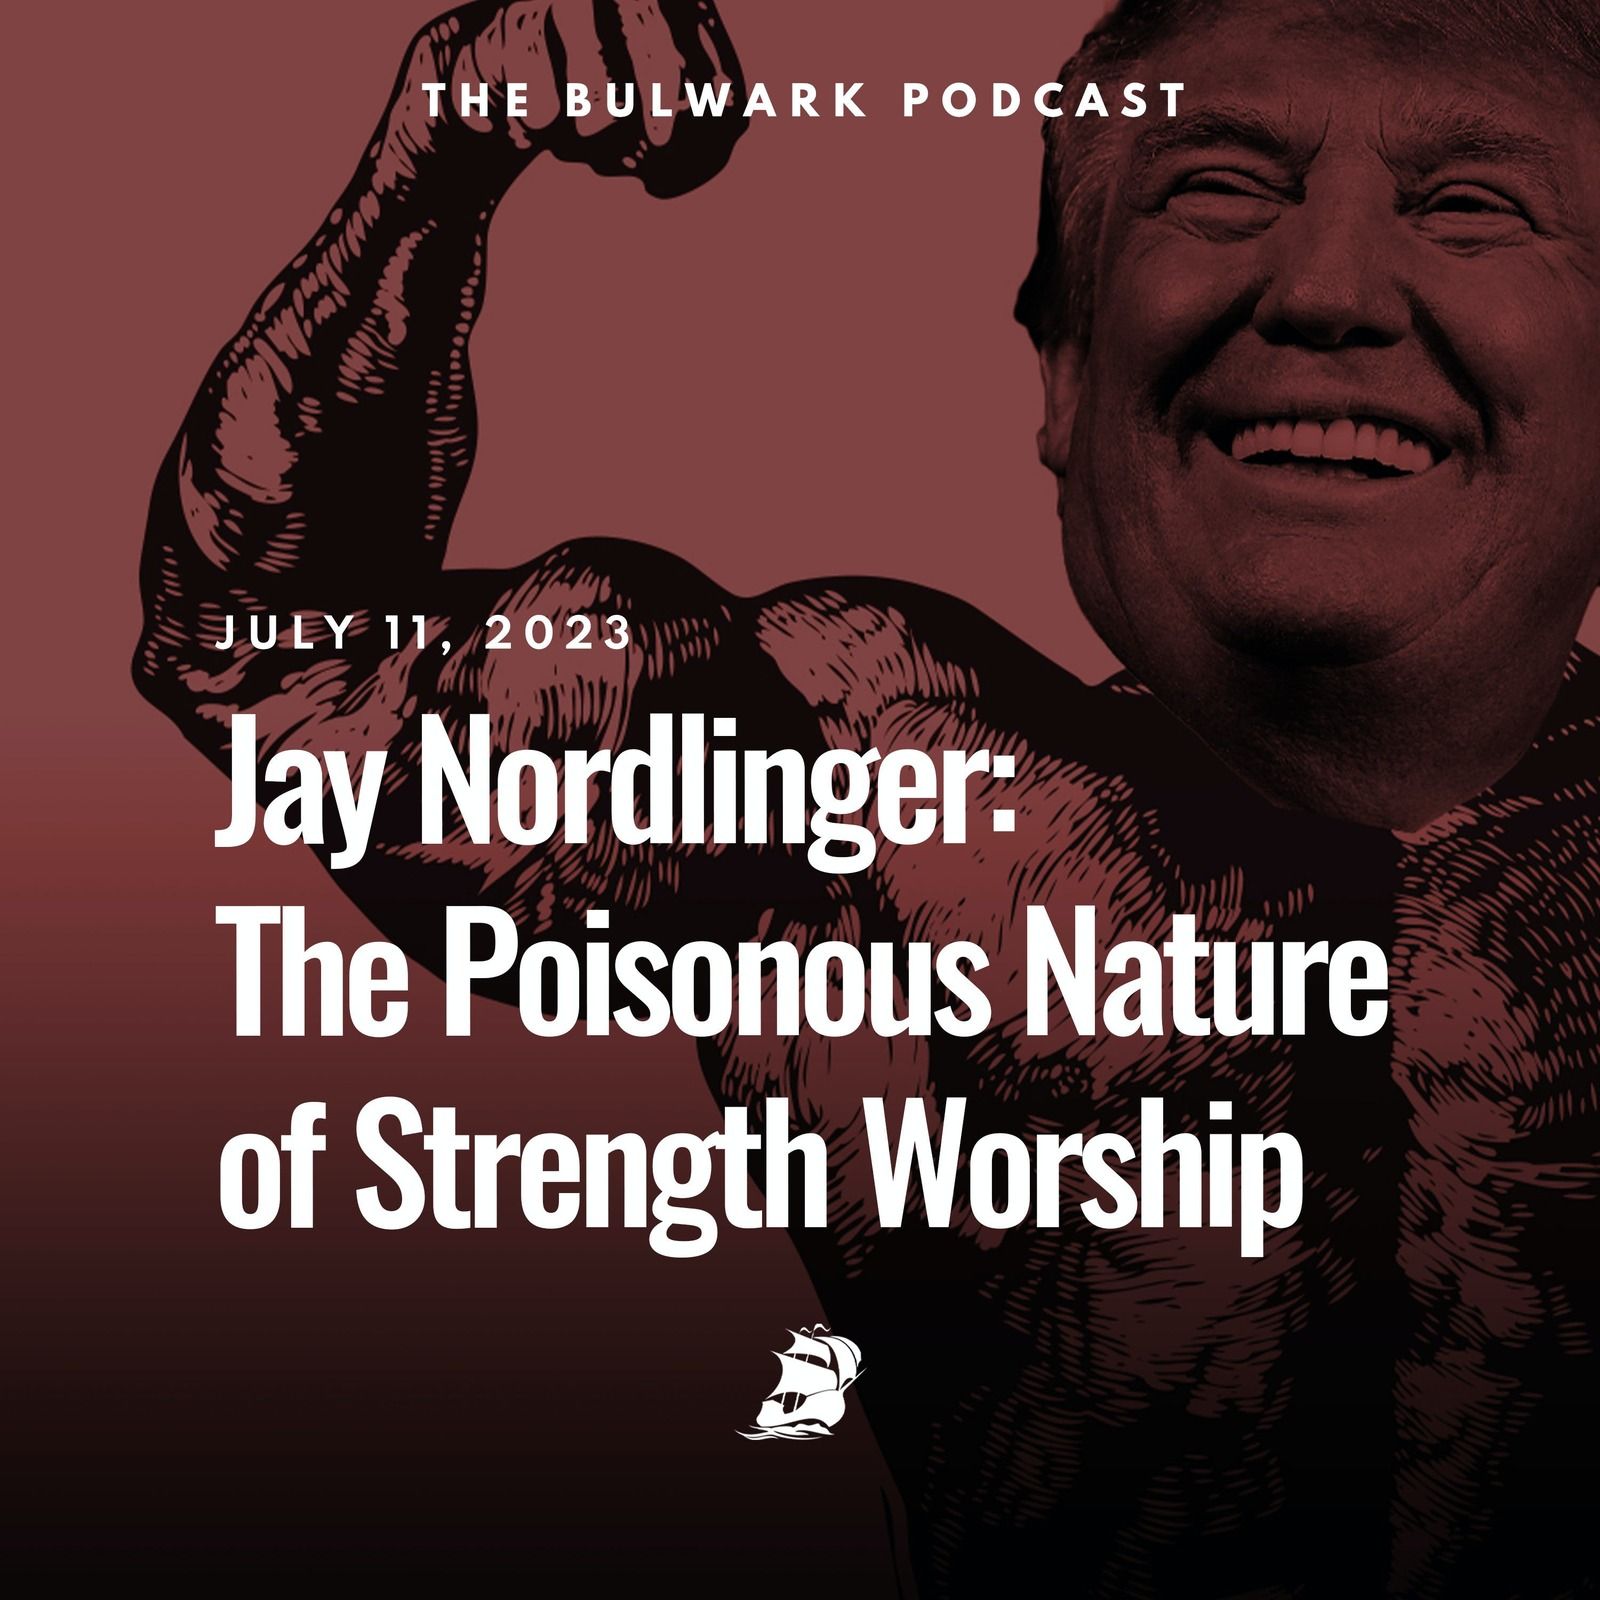 Jay Nordlinger: The Poisonous Nature of Strength Worship by The Bulwark Podcast